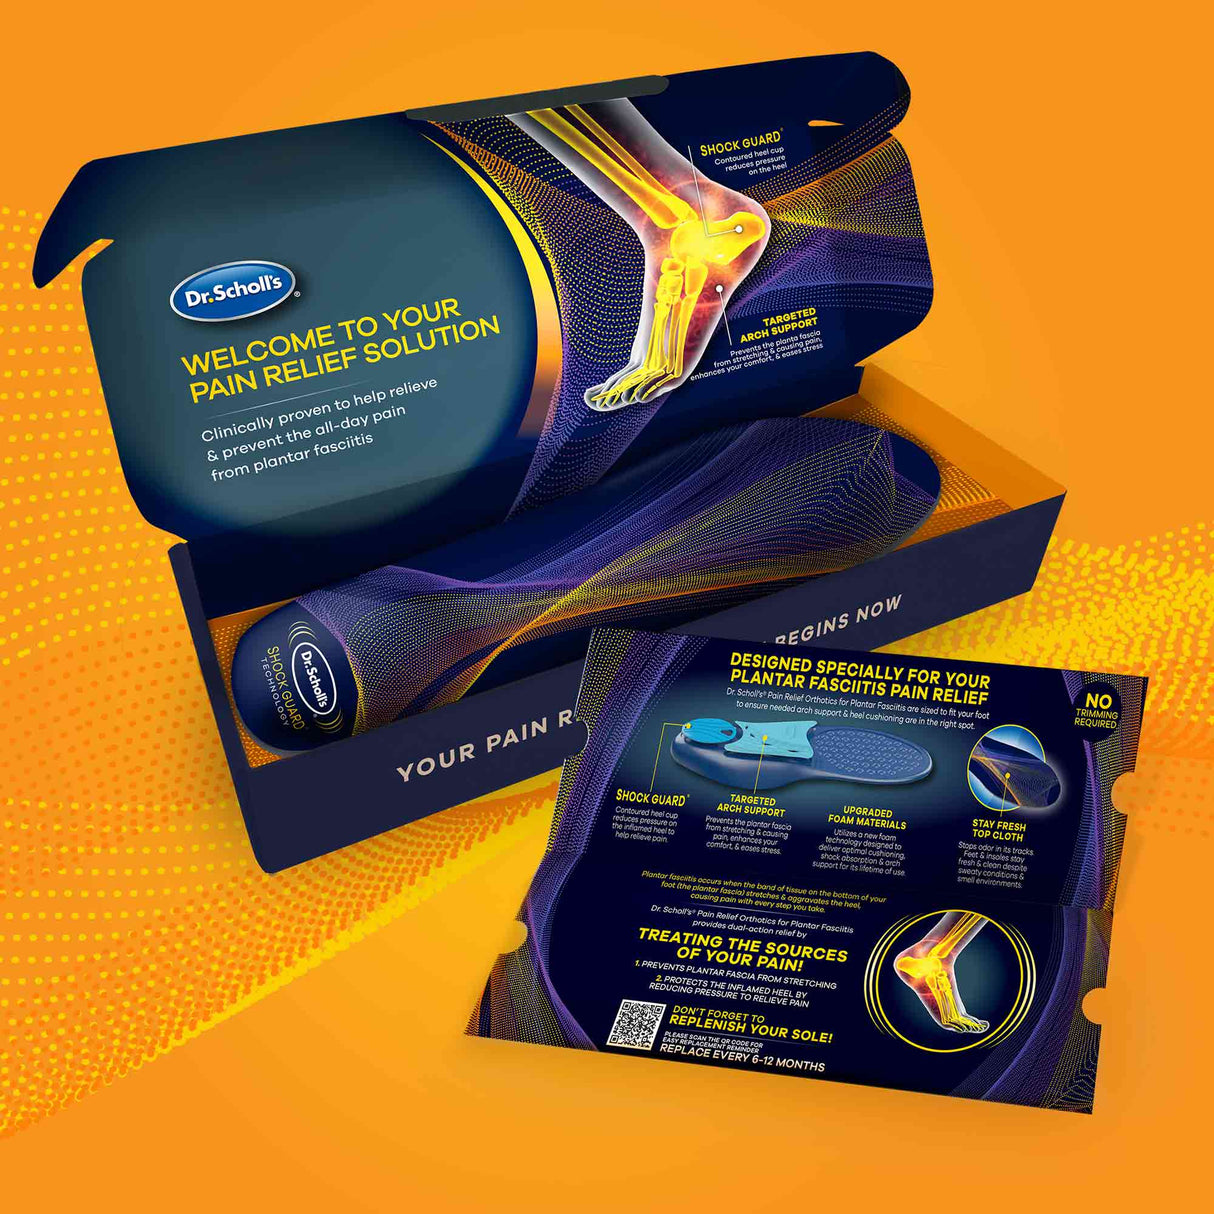 image of plantar fasciitis sized to fit insoles in box